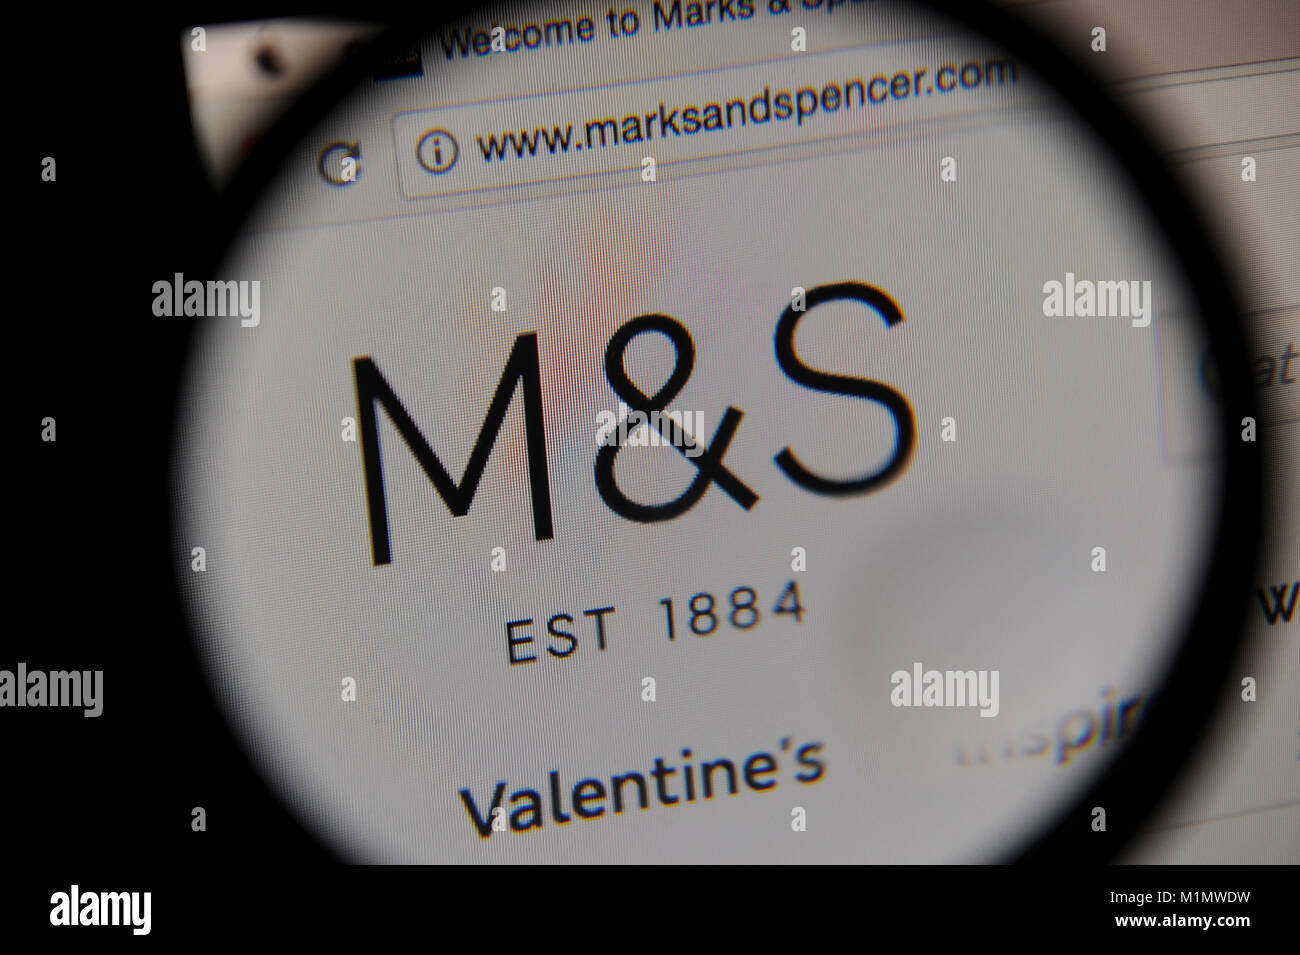 The Marks and Spencer website seen through a magnifying glass Stock Photo